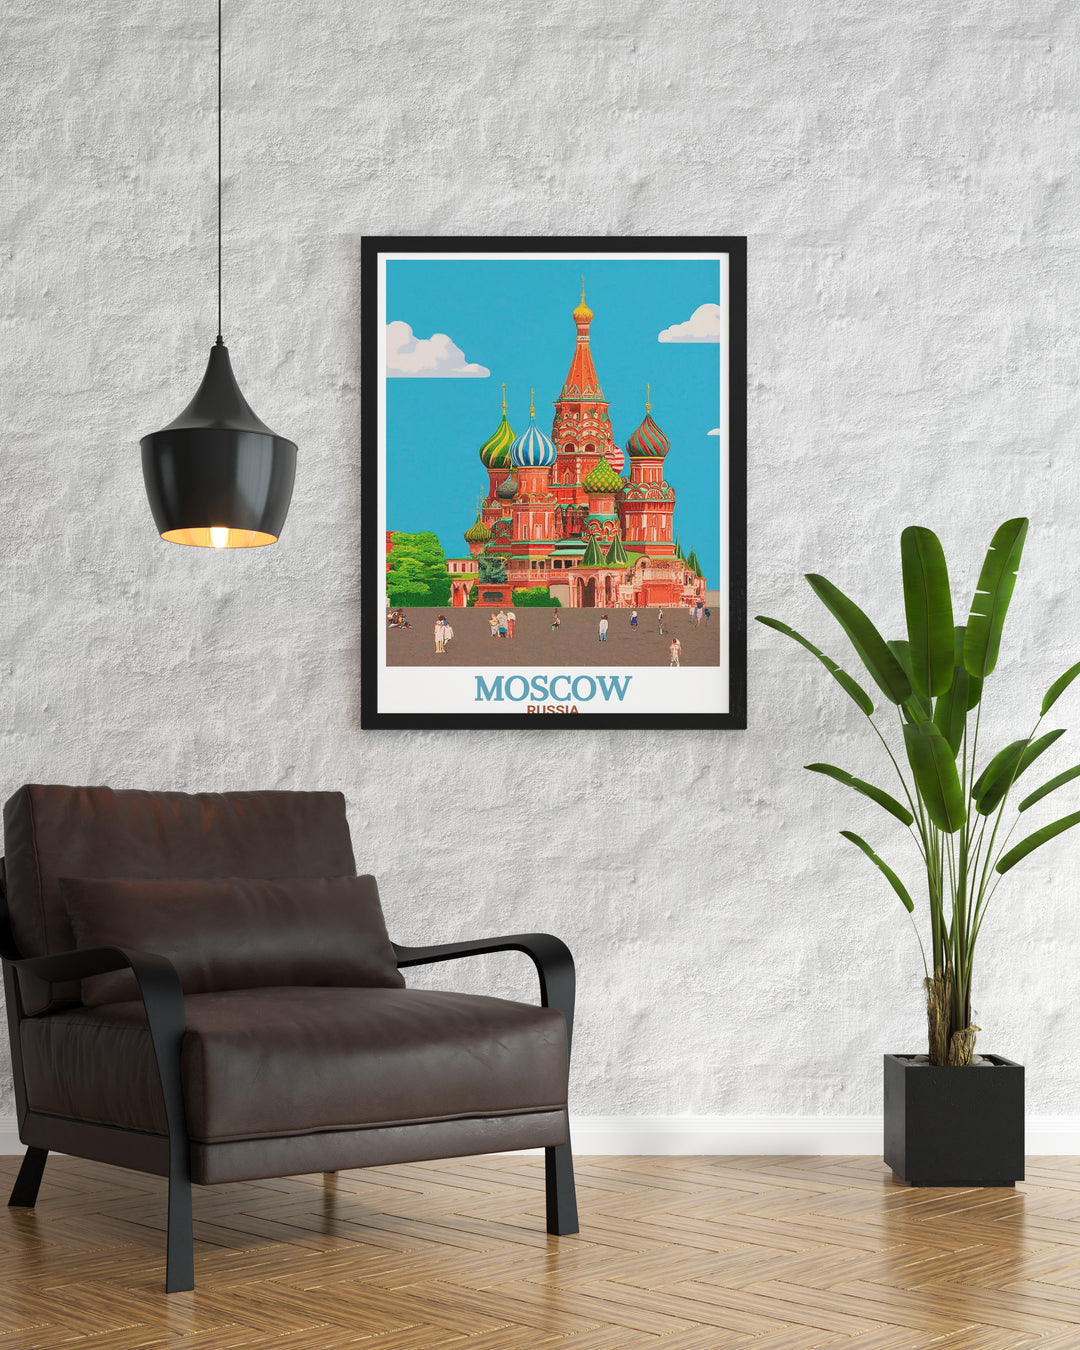 Stunning Red Square, Kremlin wall art depicting the iconic landmarks of Moscow a perfect addition to any room bringing elegance and cultural richness with its detailed and vibrant illustration.